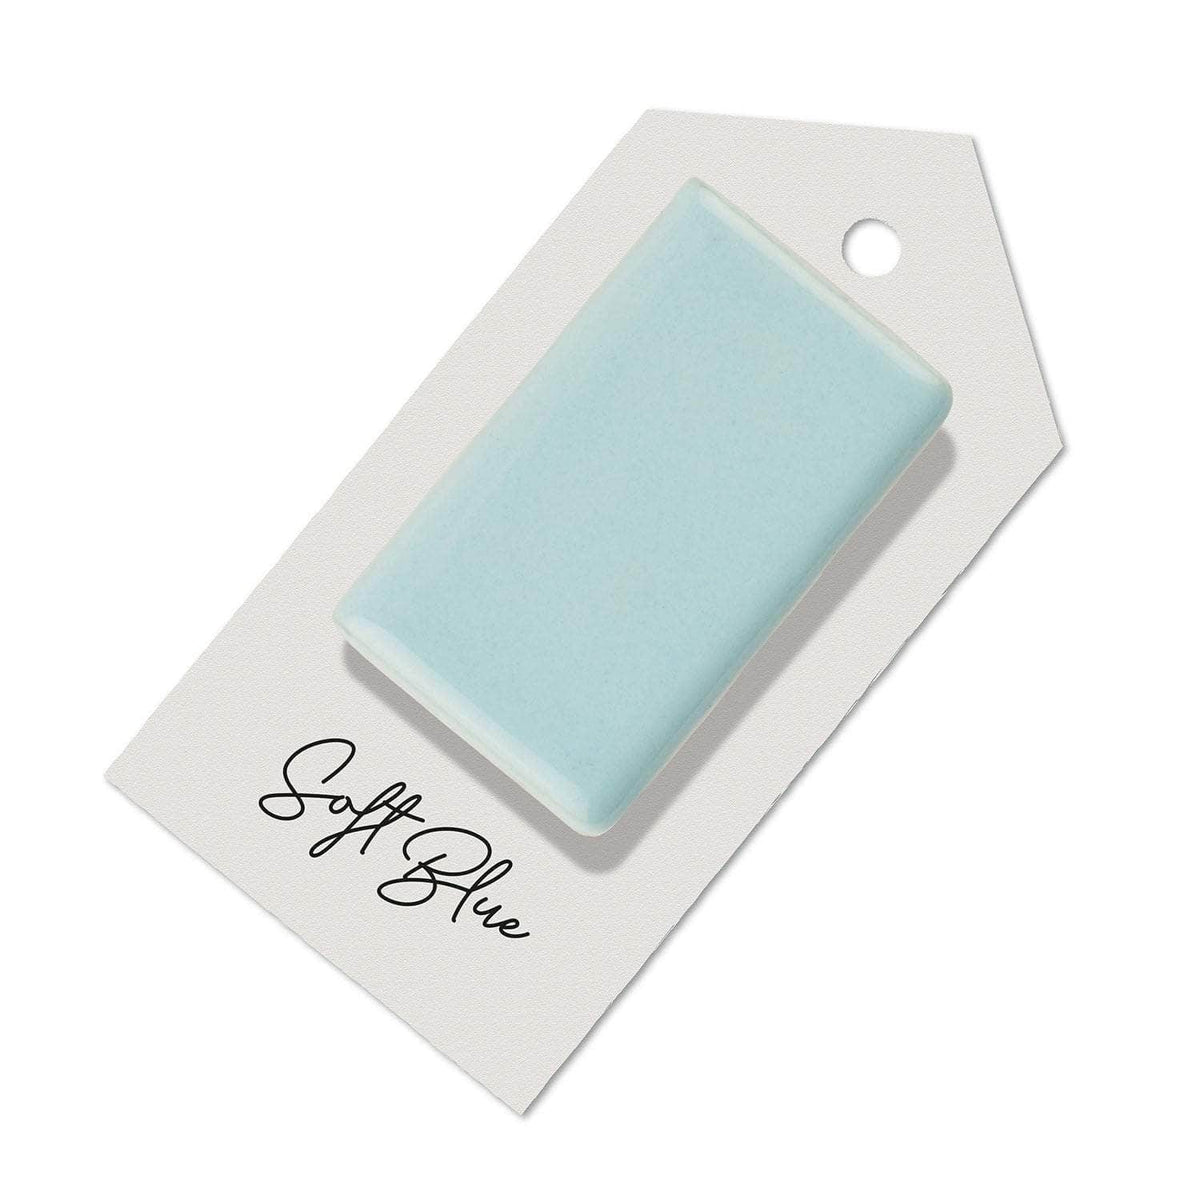 Soft Blue sample for Aga range cooker re-enamelling &amp; reconditioned cookers